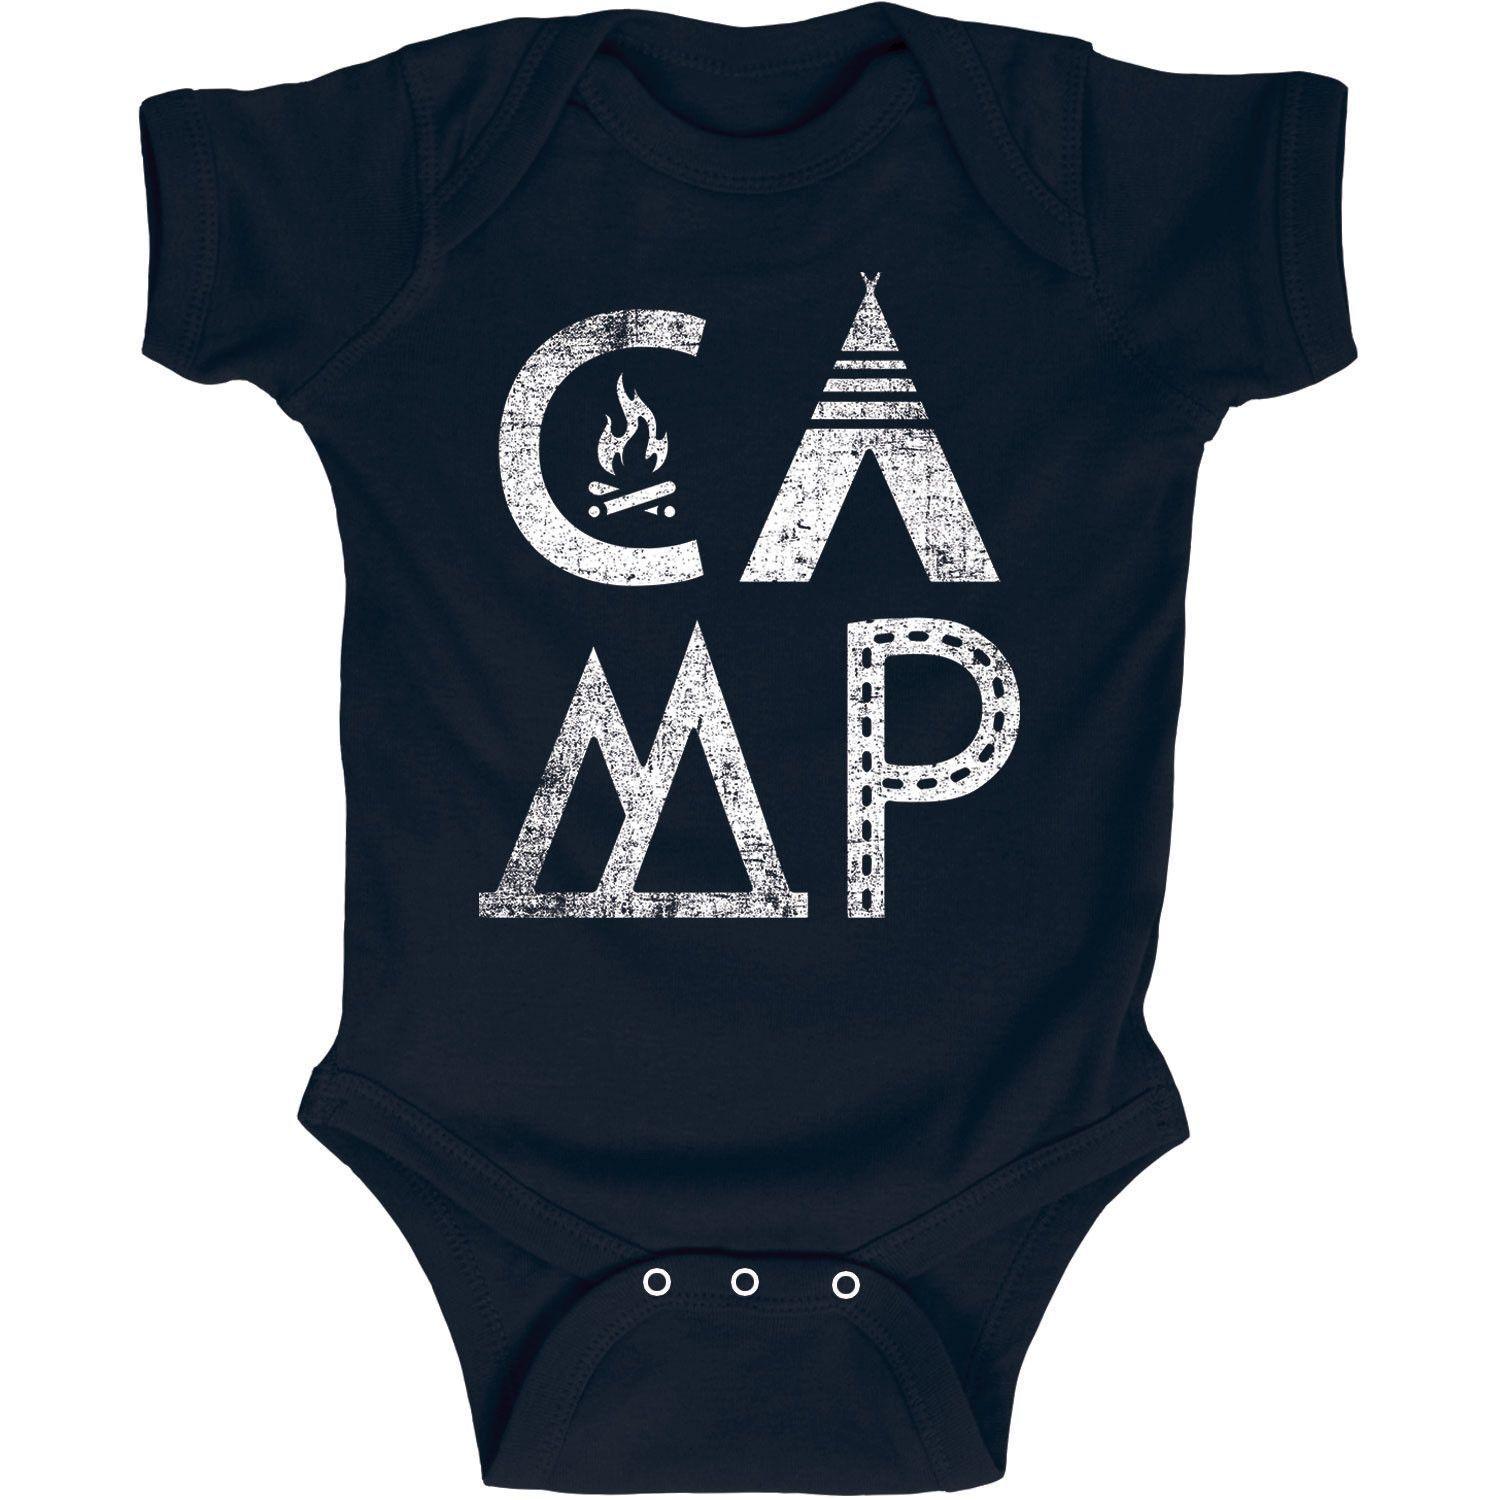 Cool Camp Logo - Here's a cool camping idea. Camping shirts for the kids on your next ...